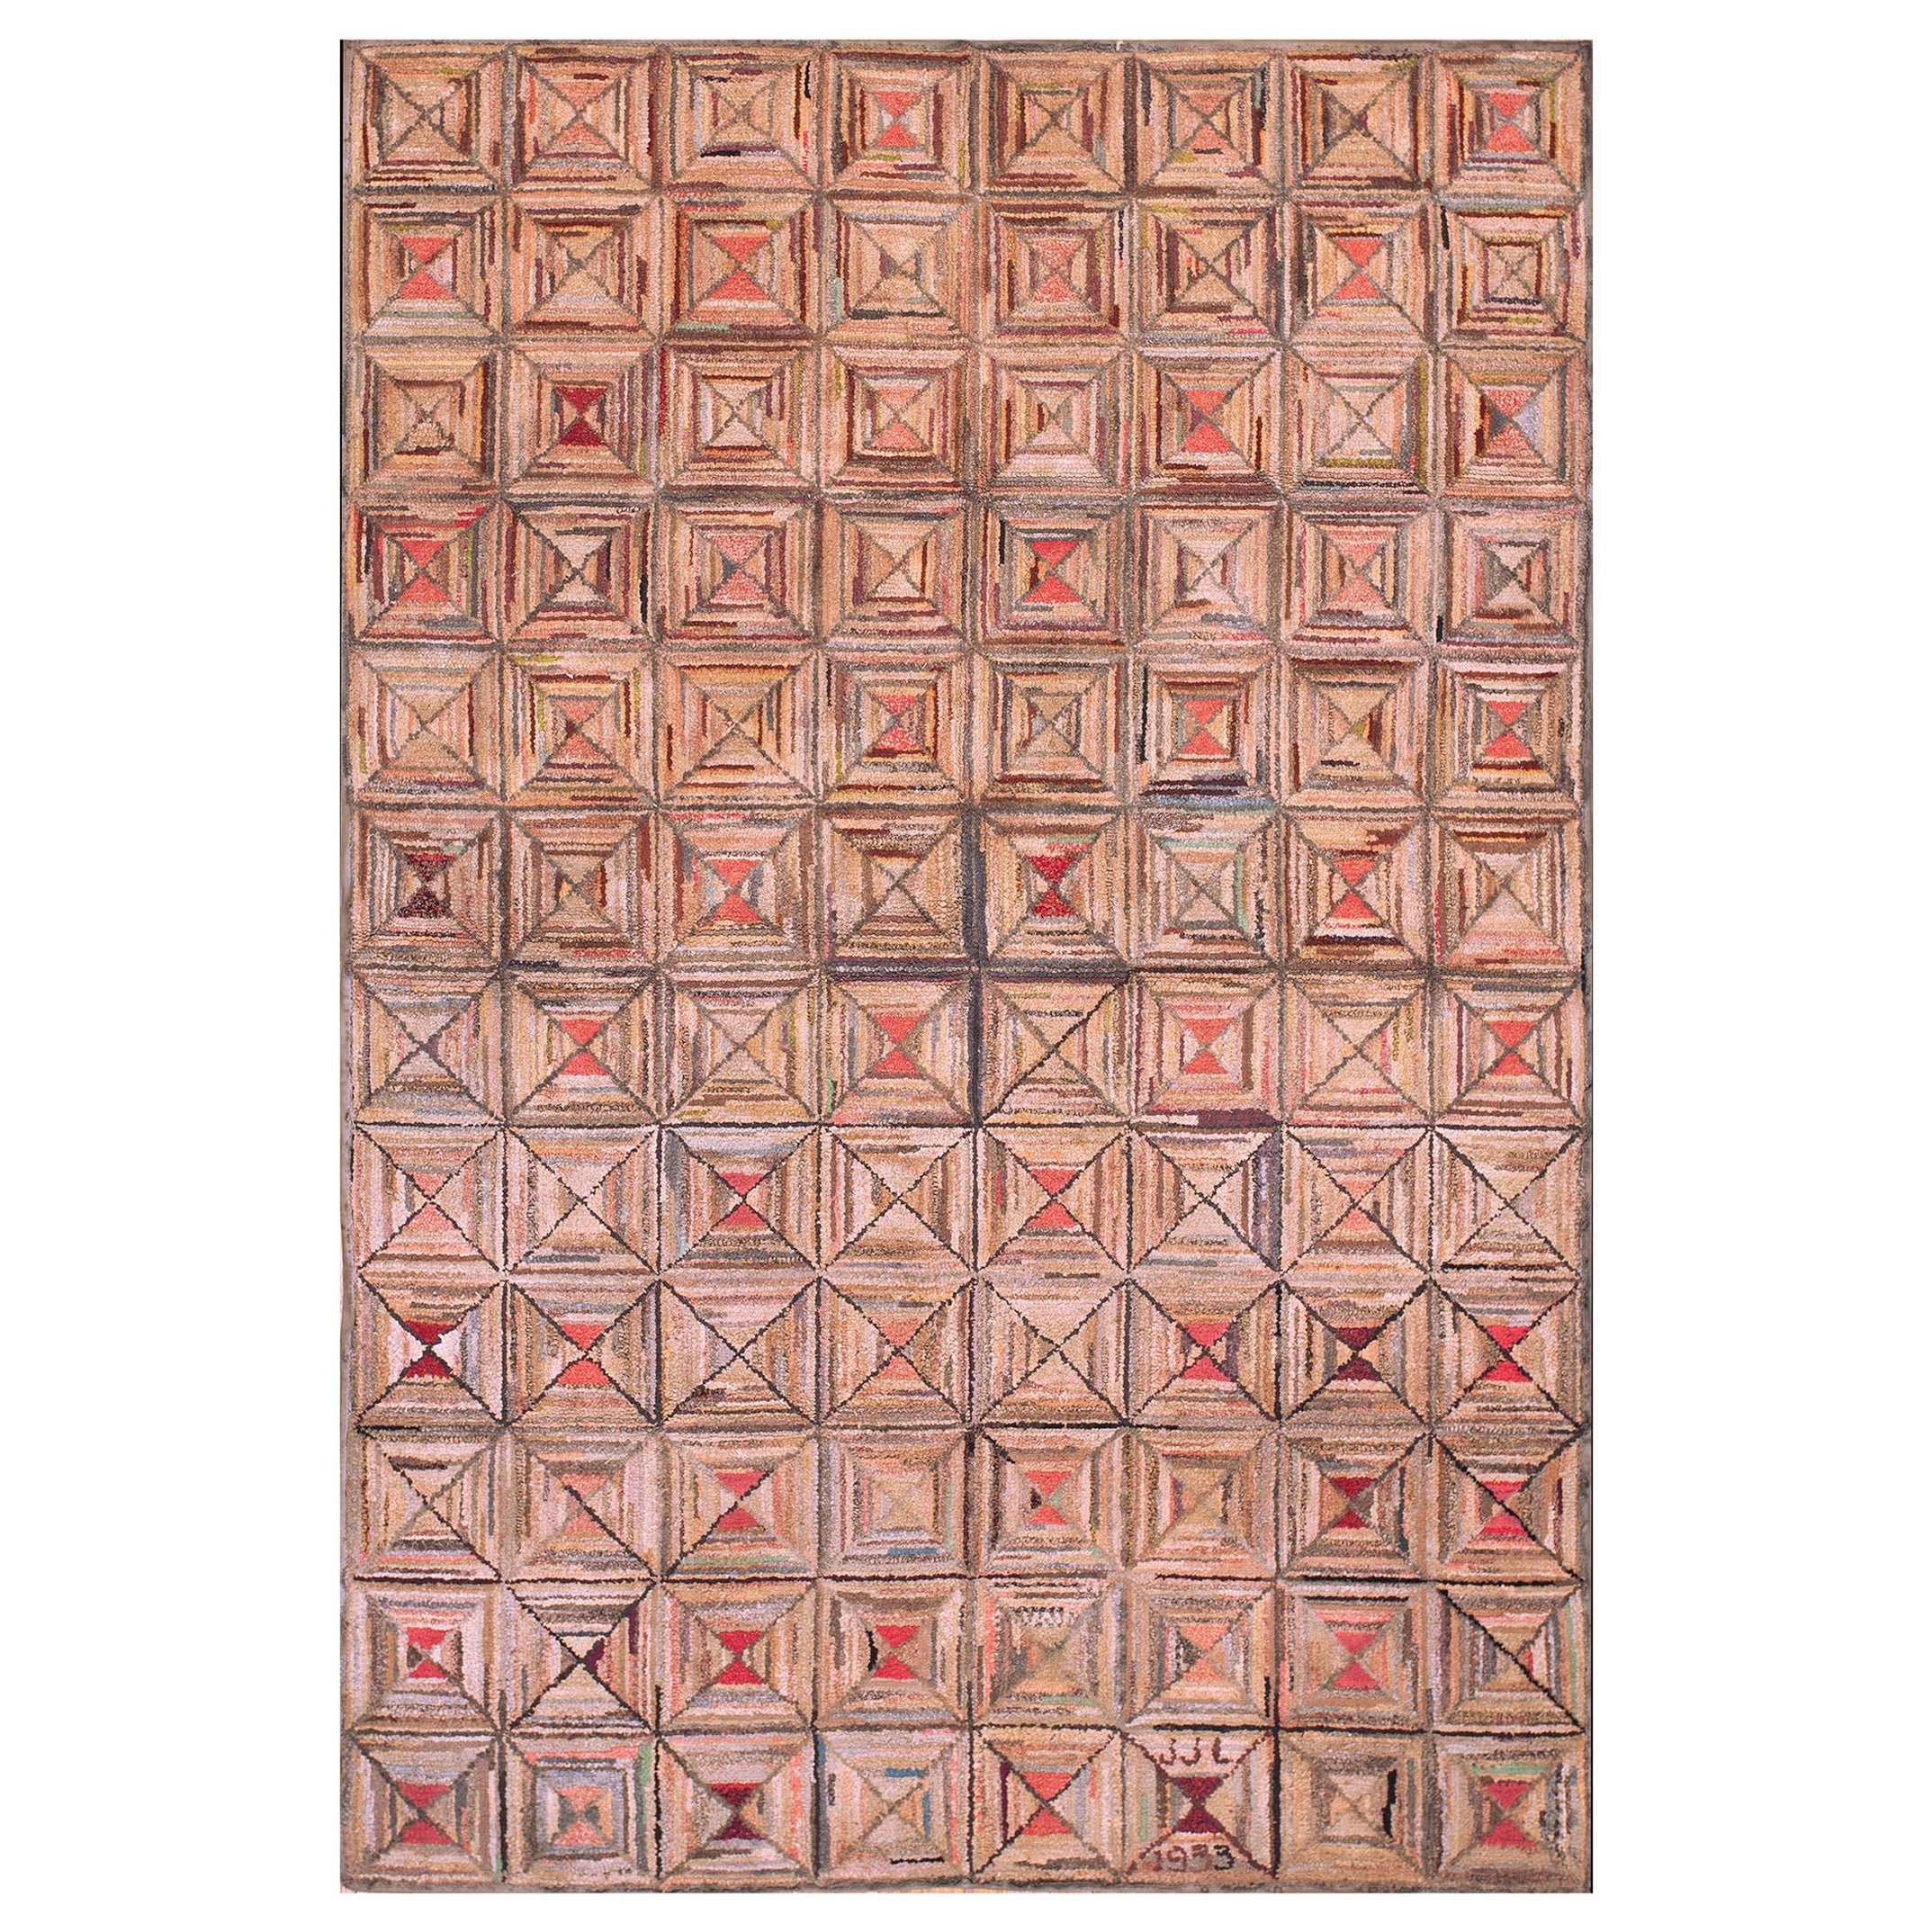 Early 20th Century American Hooked Rug ( 5'6" x 8' - 167 x 244 ) For Sale